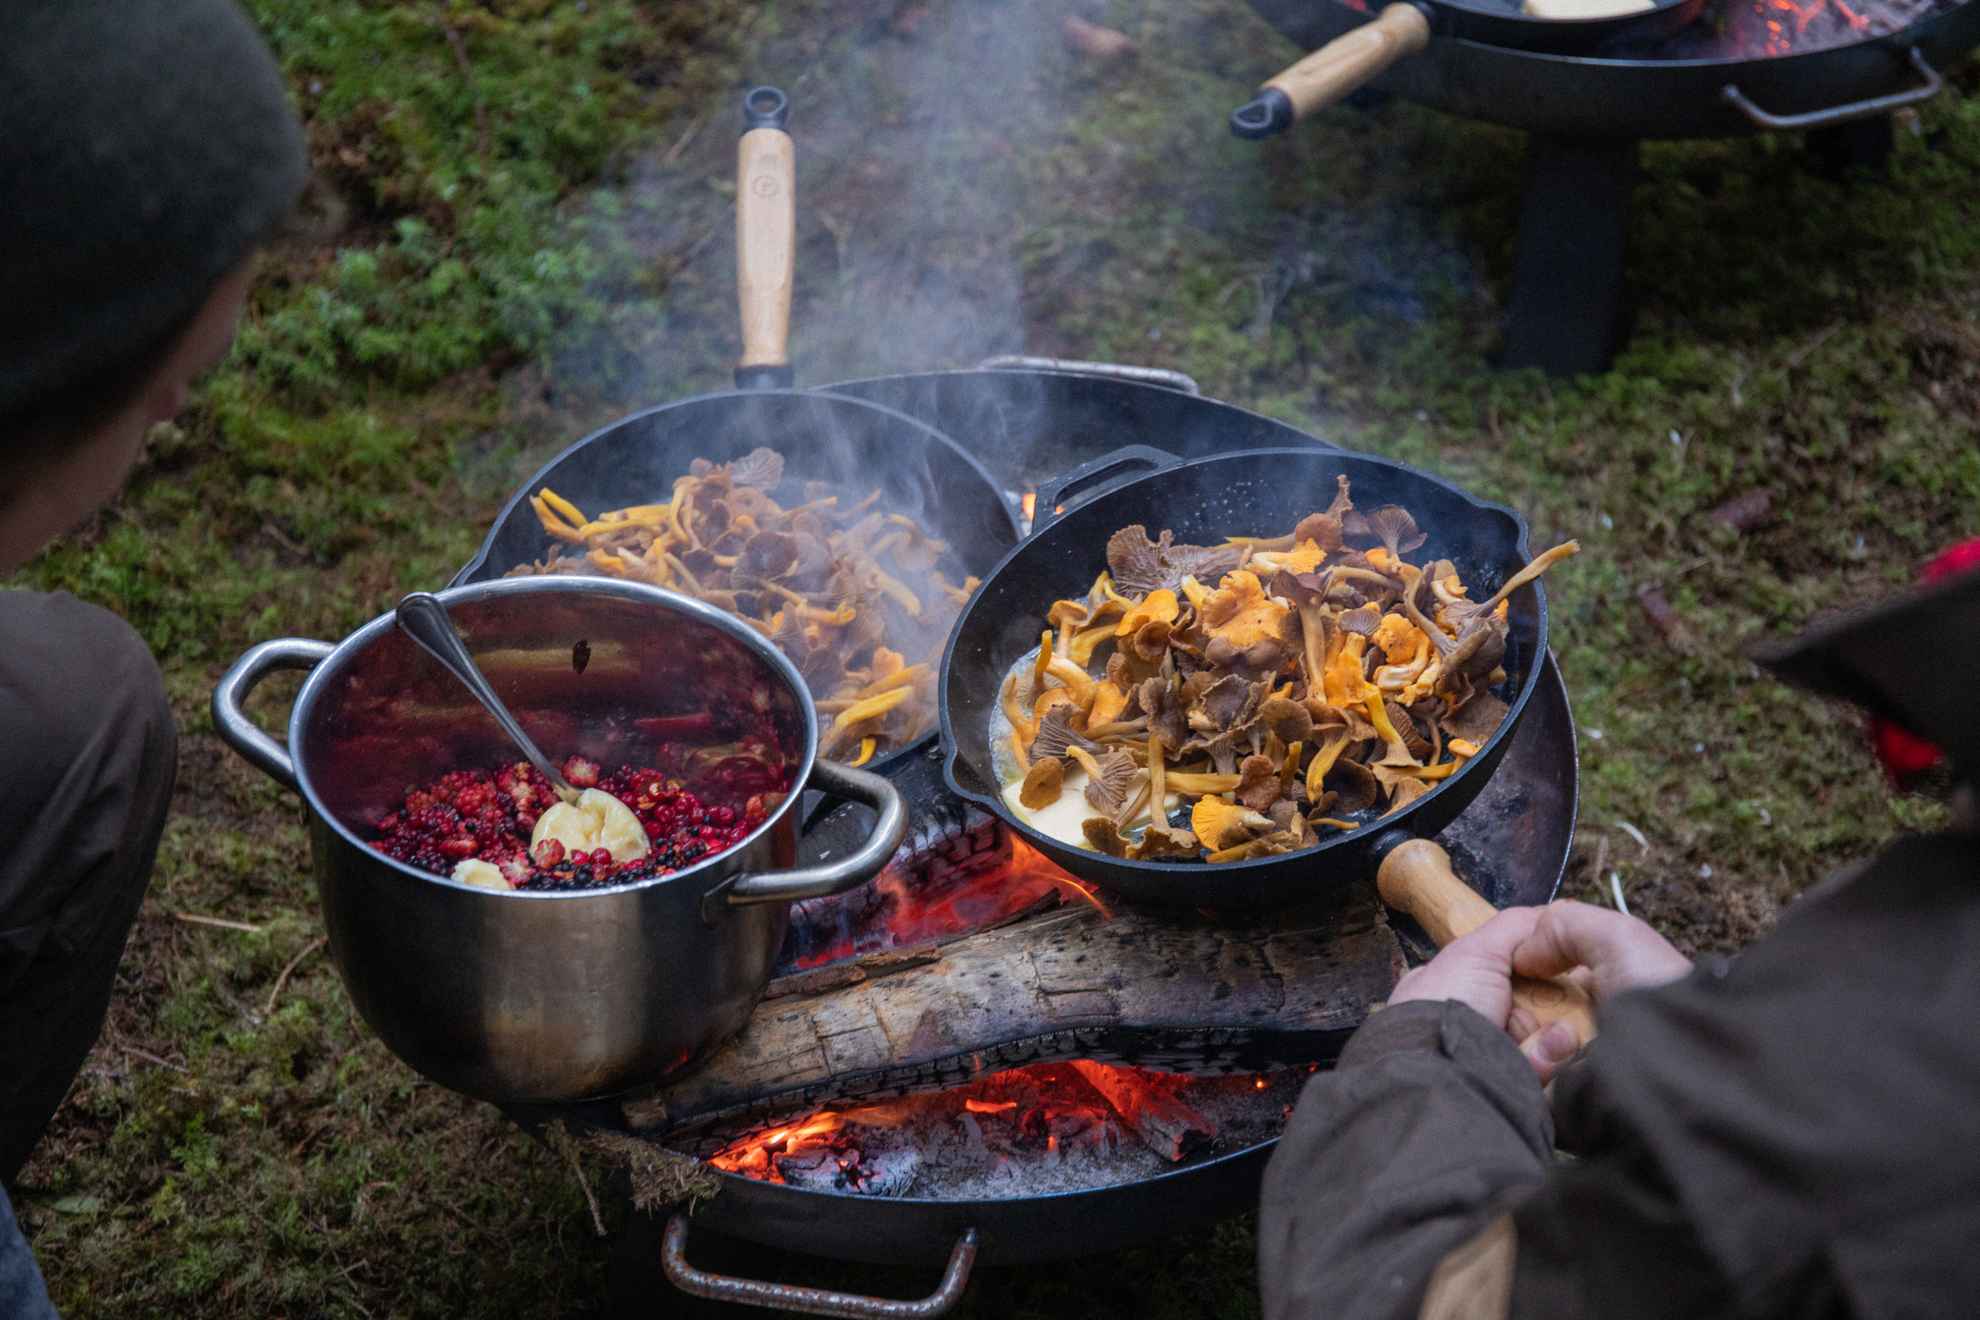 People frying chanterelle and boiling berries outdoors.